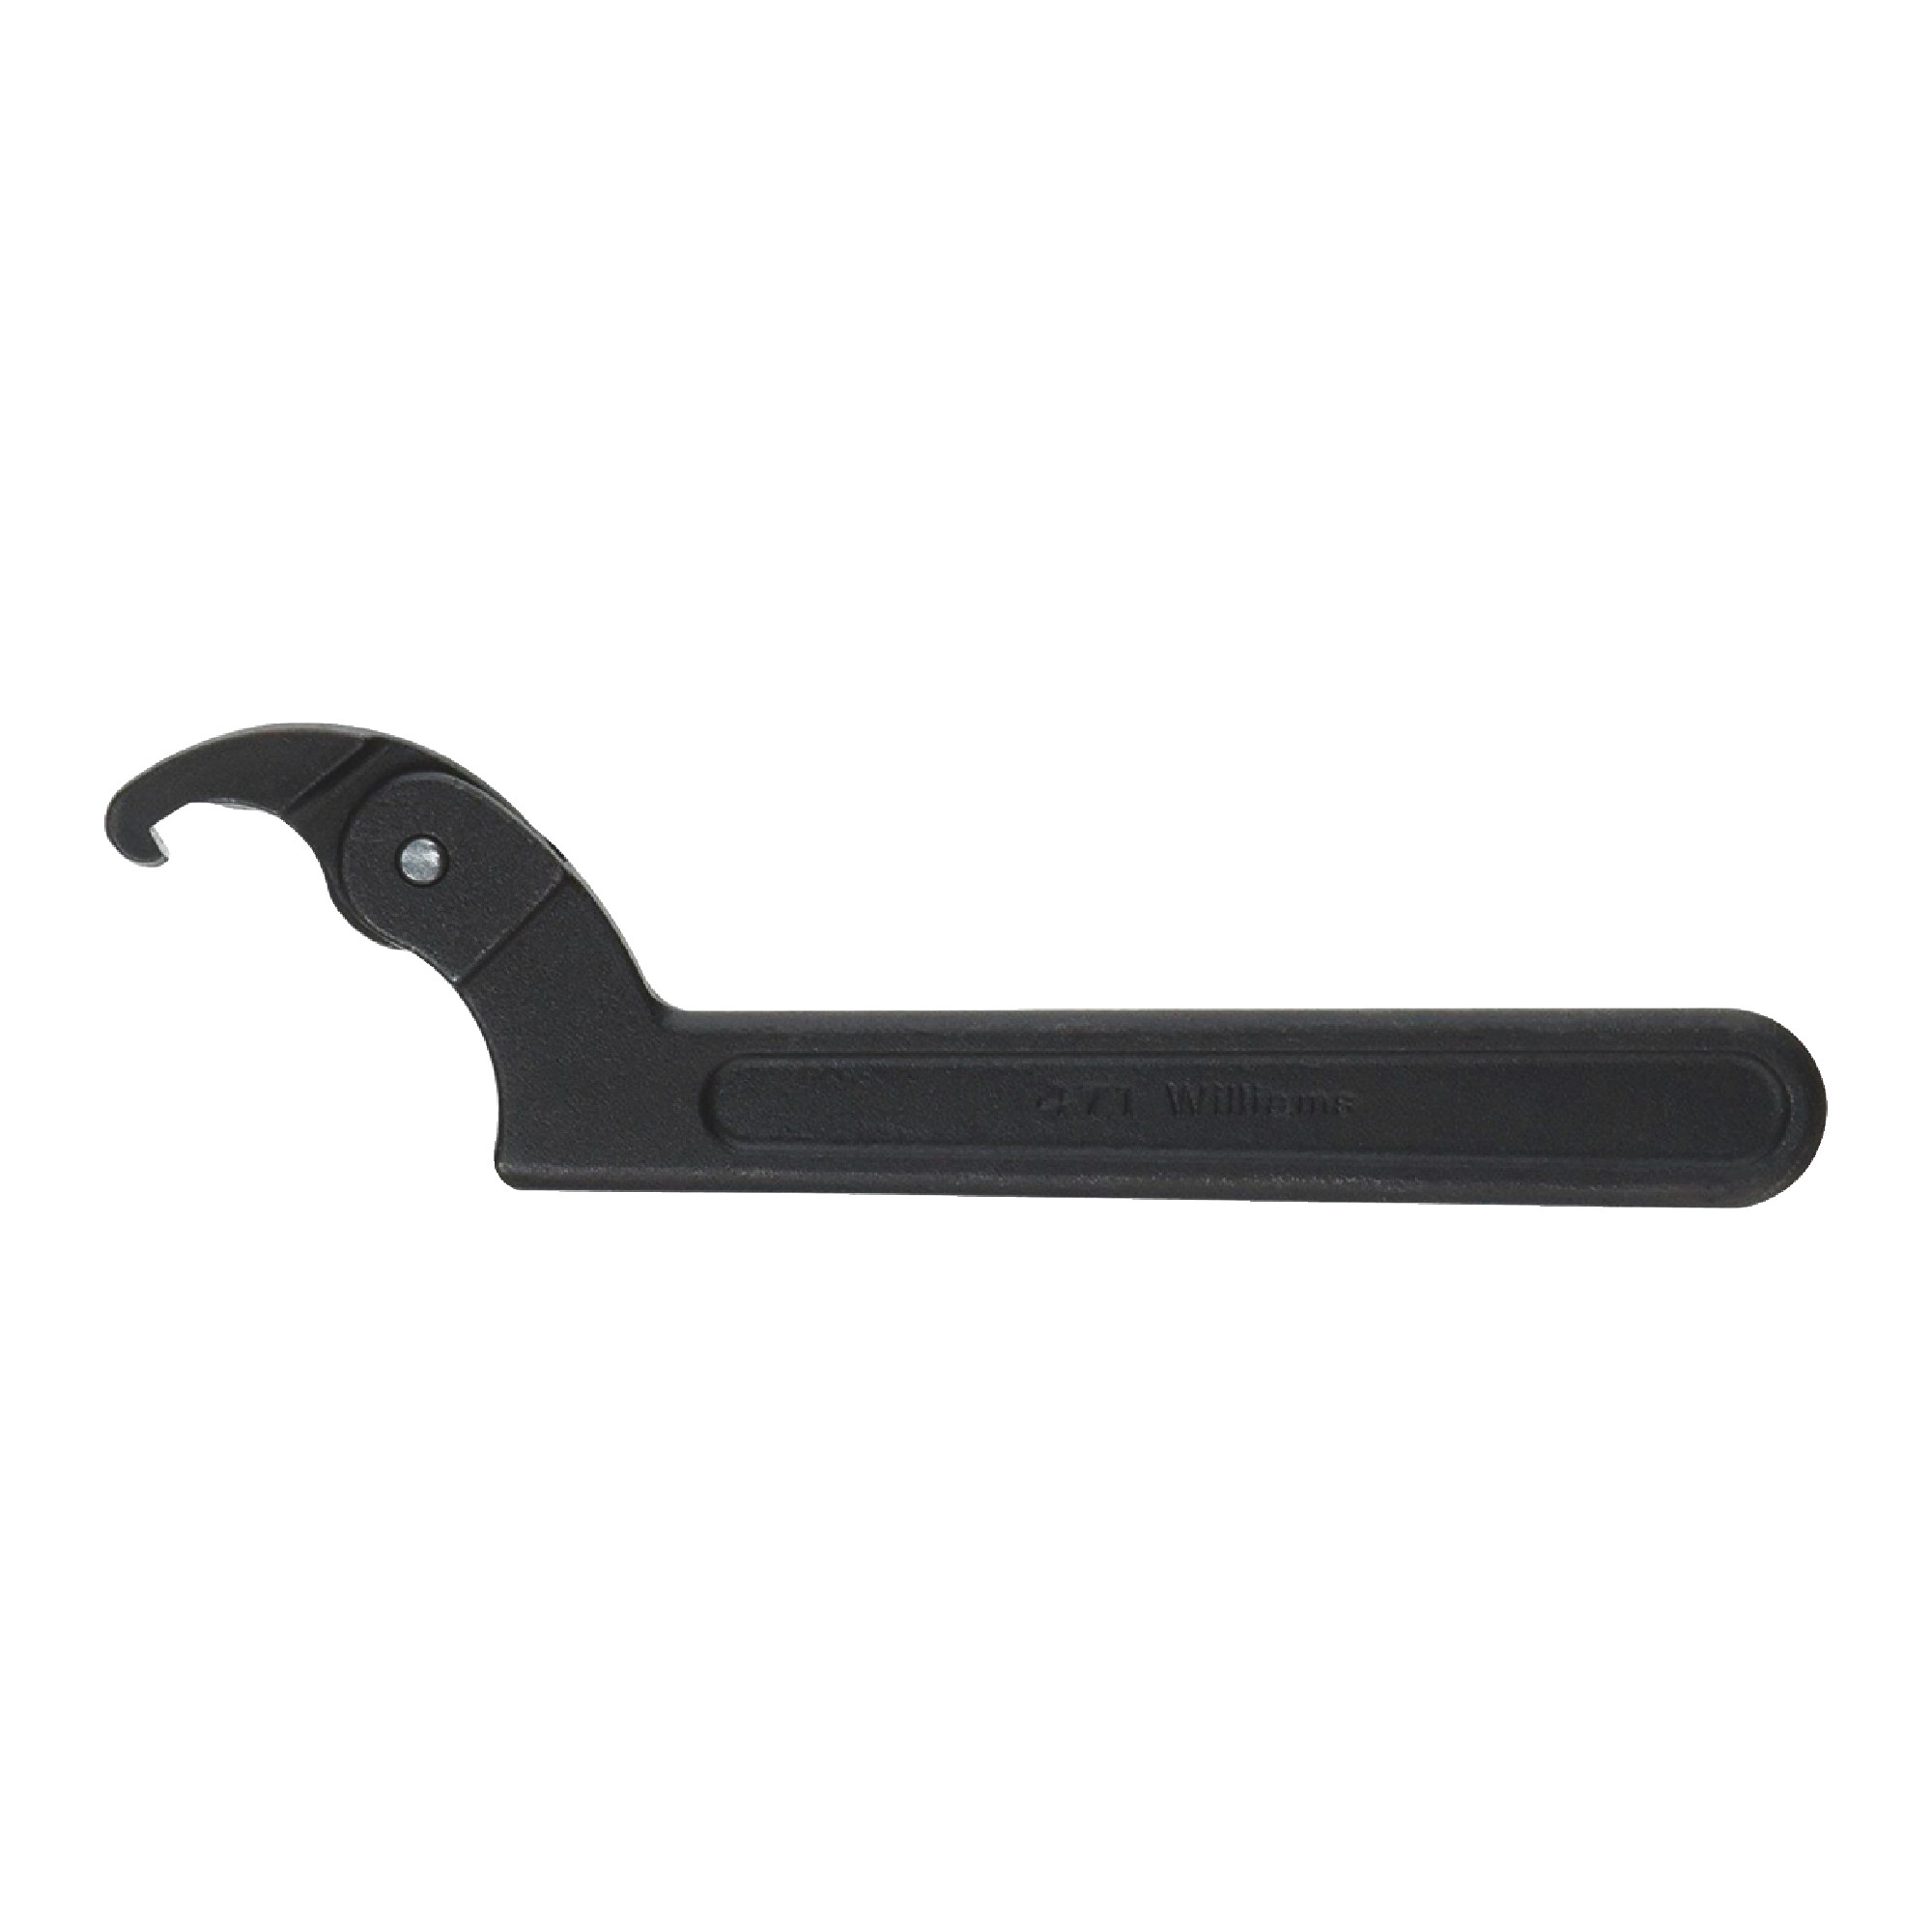 Adjustable Hook Spanner Wrench - Model: 474A  Diameter: 4-1/2" - 6-1/4"  Height: 1/4"  Overall Length: 17-1/2"